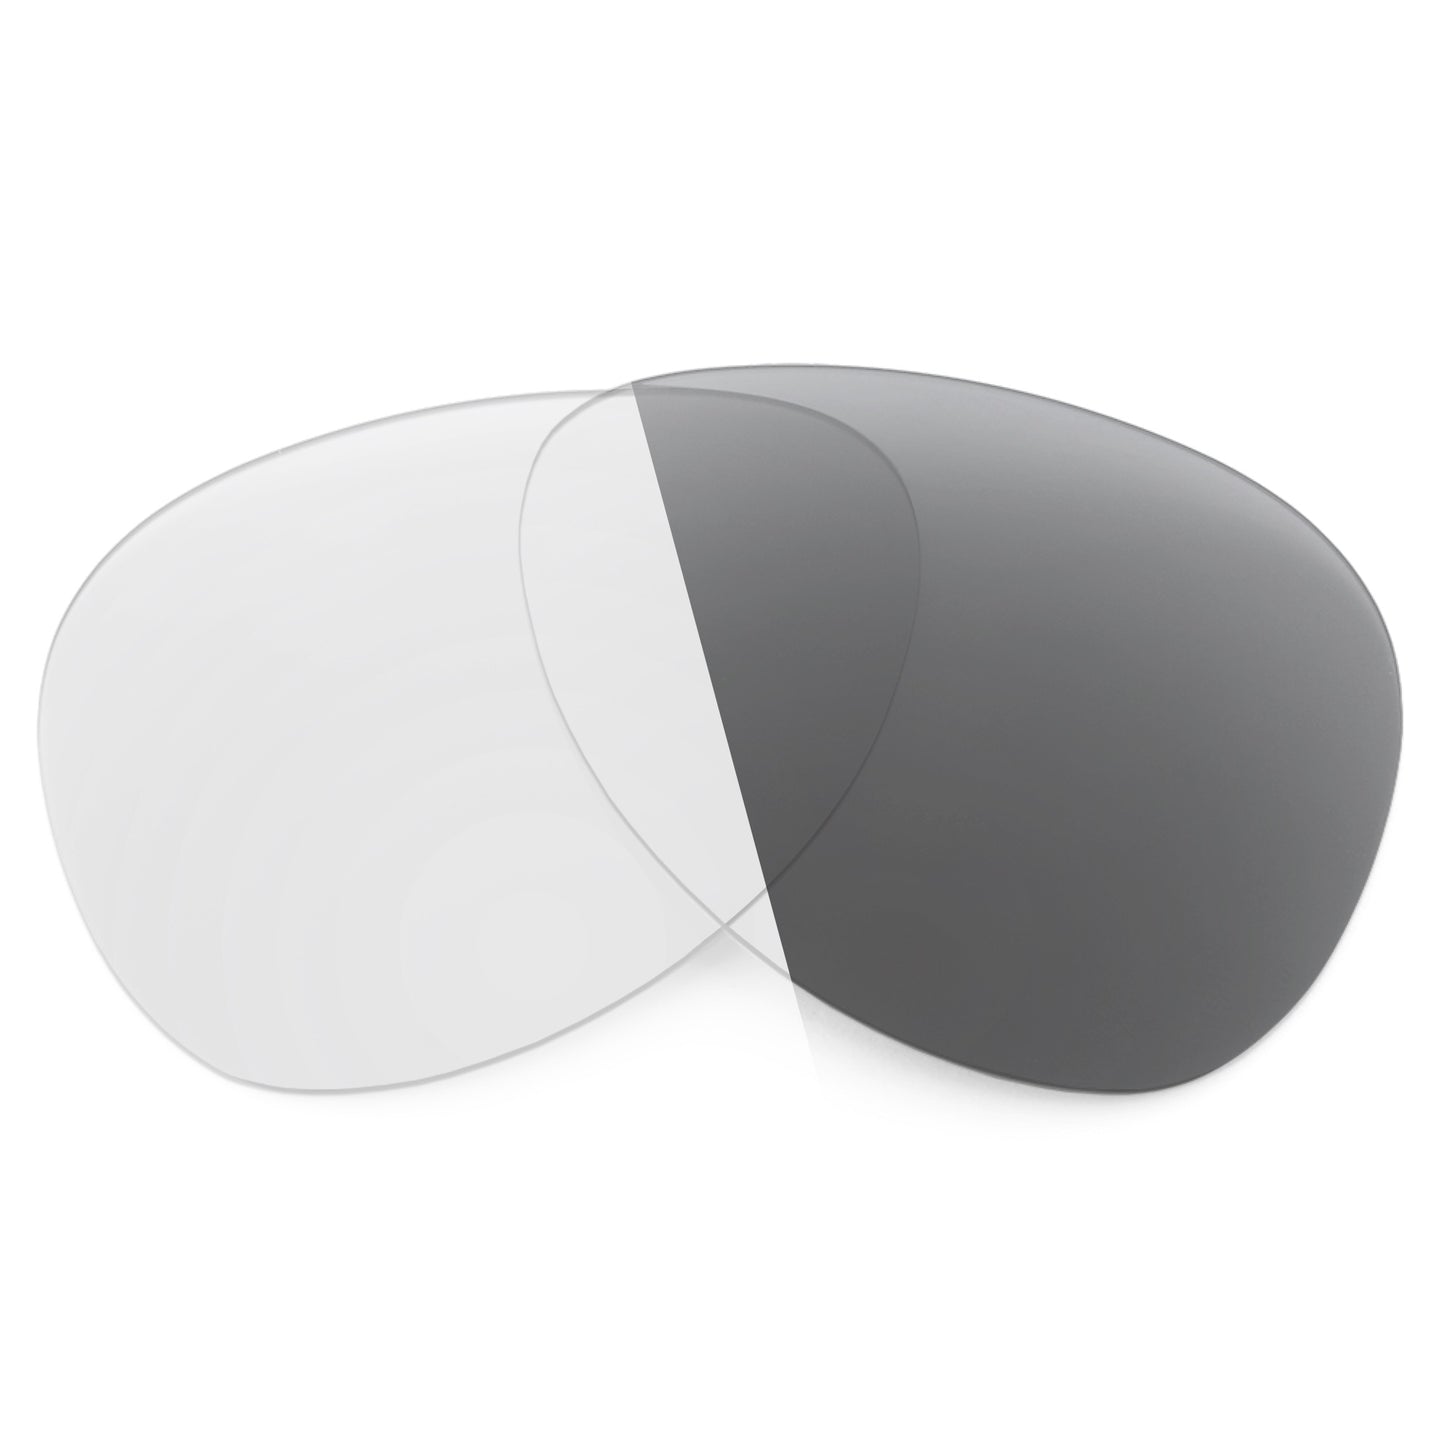 Revant replacement lenses for Ray-Ban RB3386 67mm Non-Polarized Adapt Gray Photochromic